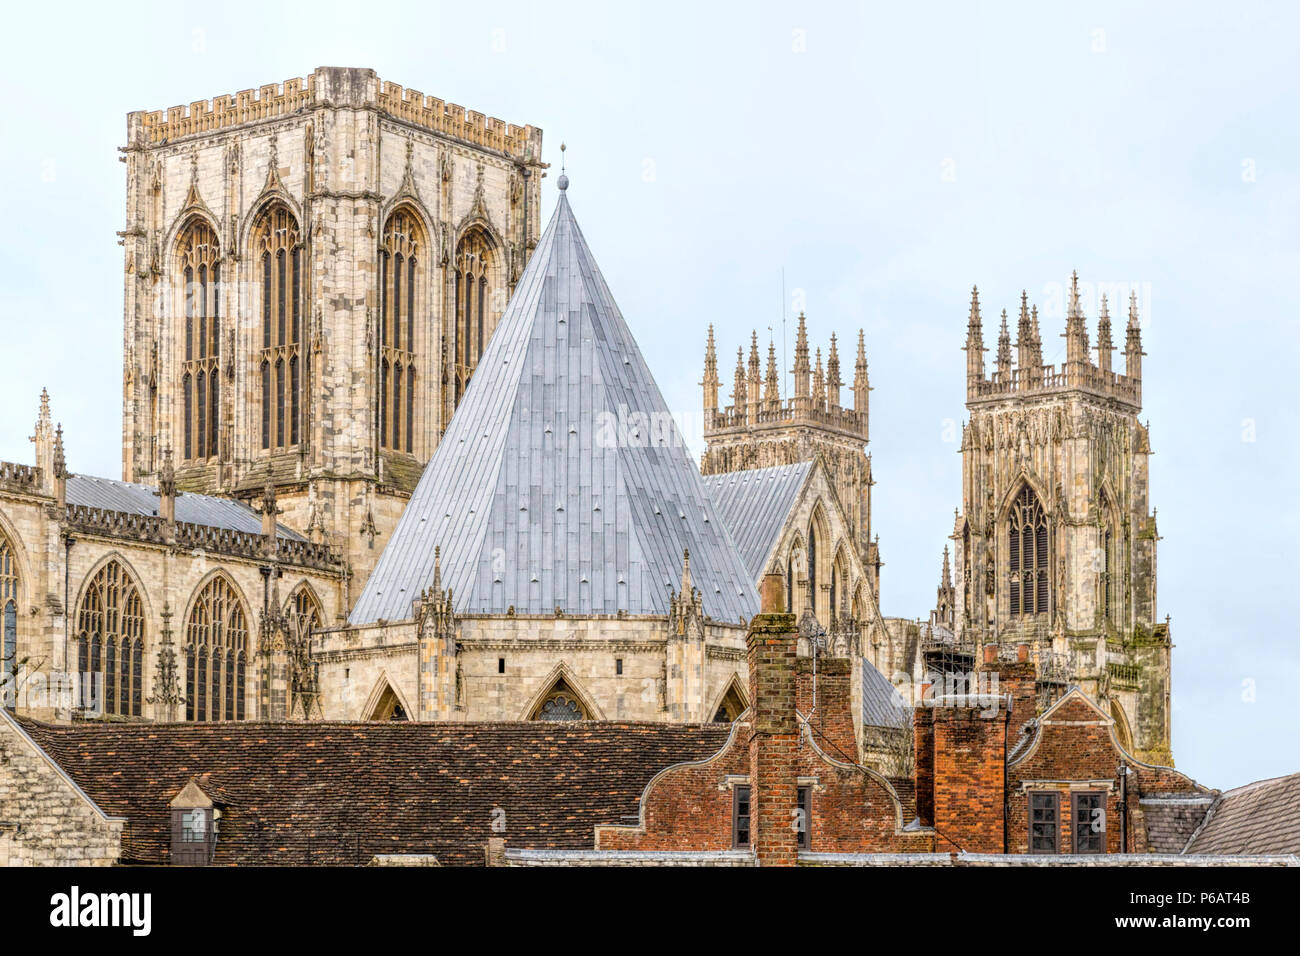 Chapter House rooftop with Central Tower and Western Towers of York Minster, Yorkshire, England, United Kingdom. Stock Photo